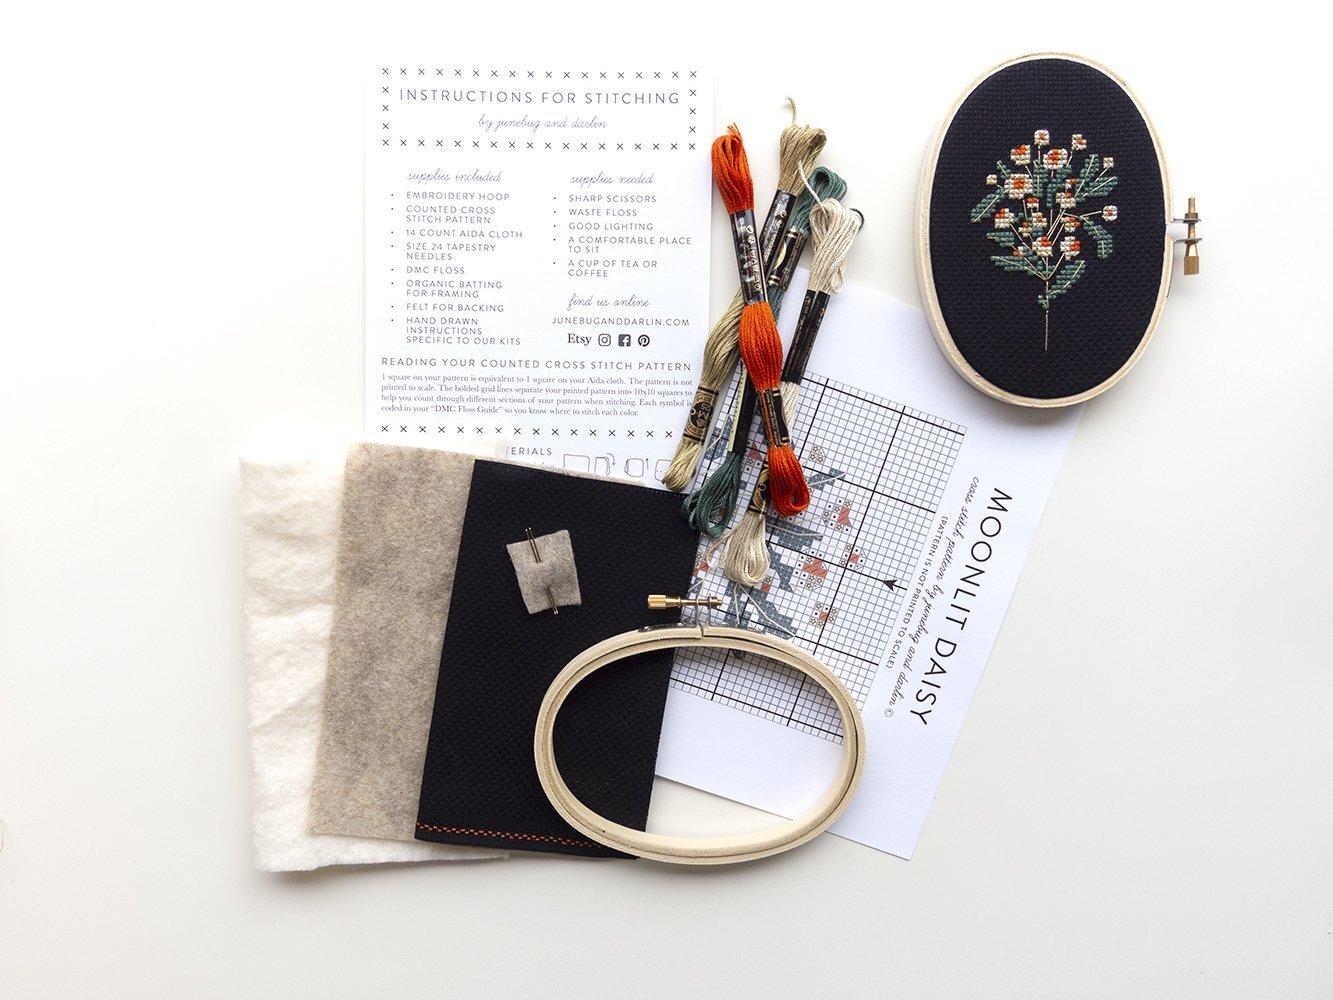 Contents of Moonlit Daisy Cross Stitch Kit: Embroidery thread, hoop, needles, pattern, directions, felt backing, and organic batting.